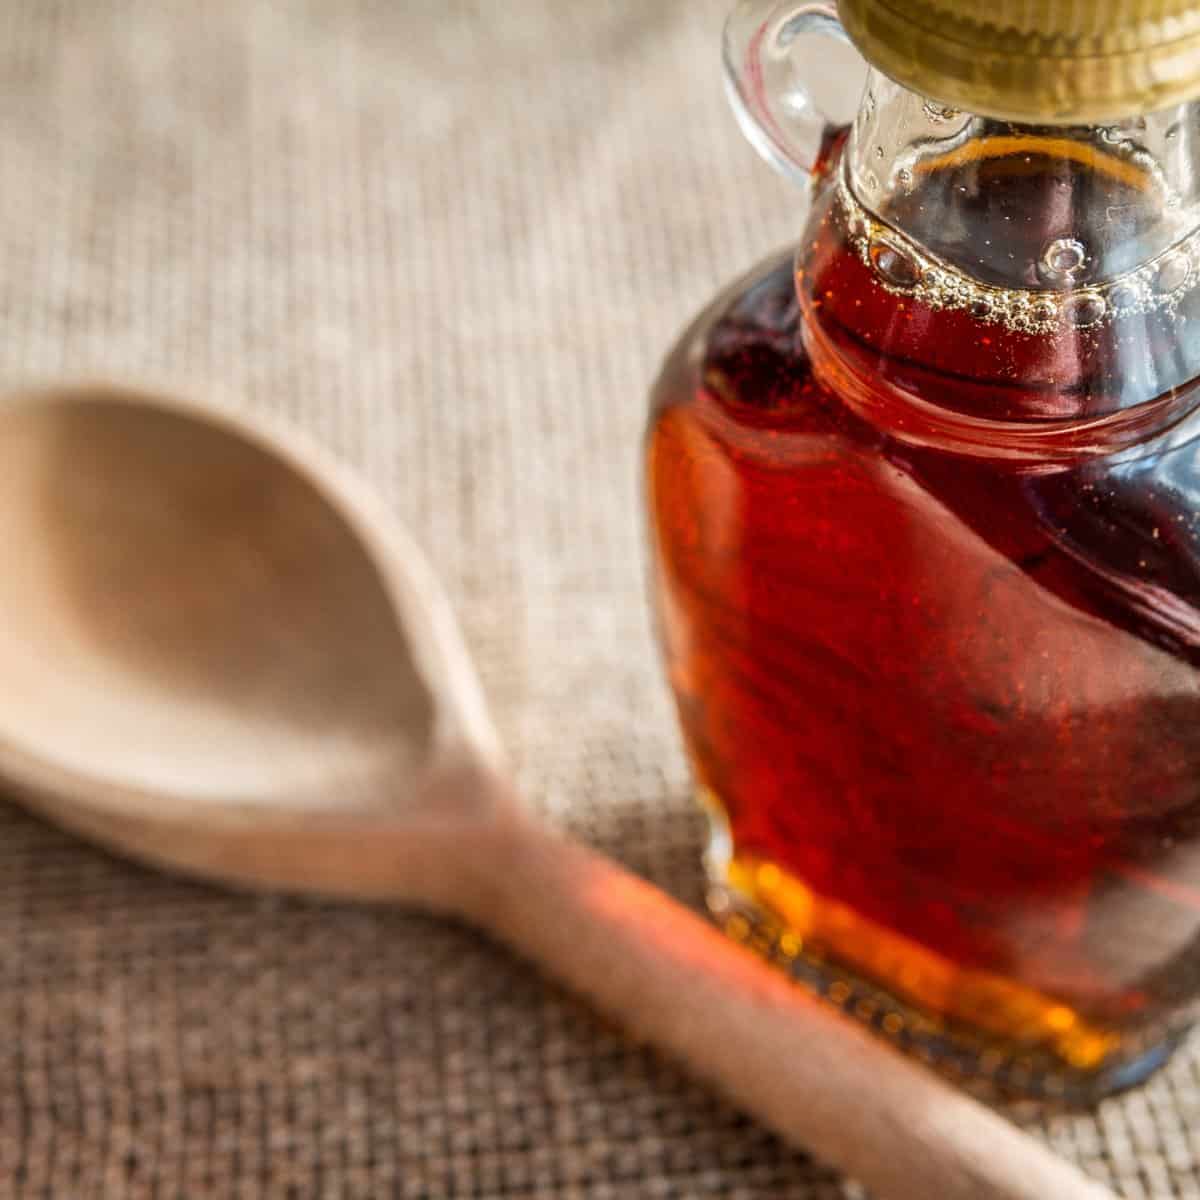 How to cook with maple syrup